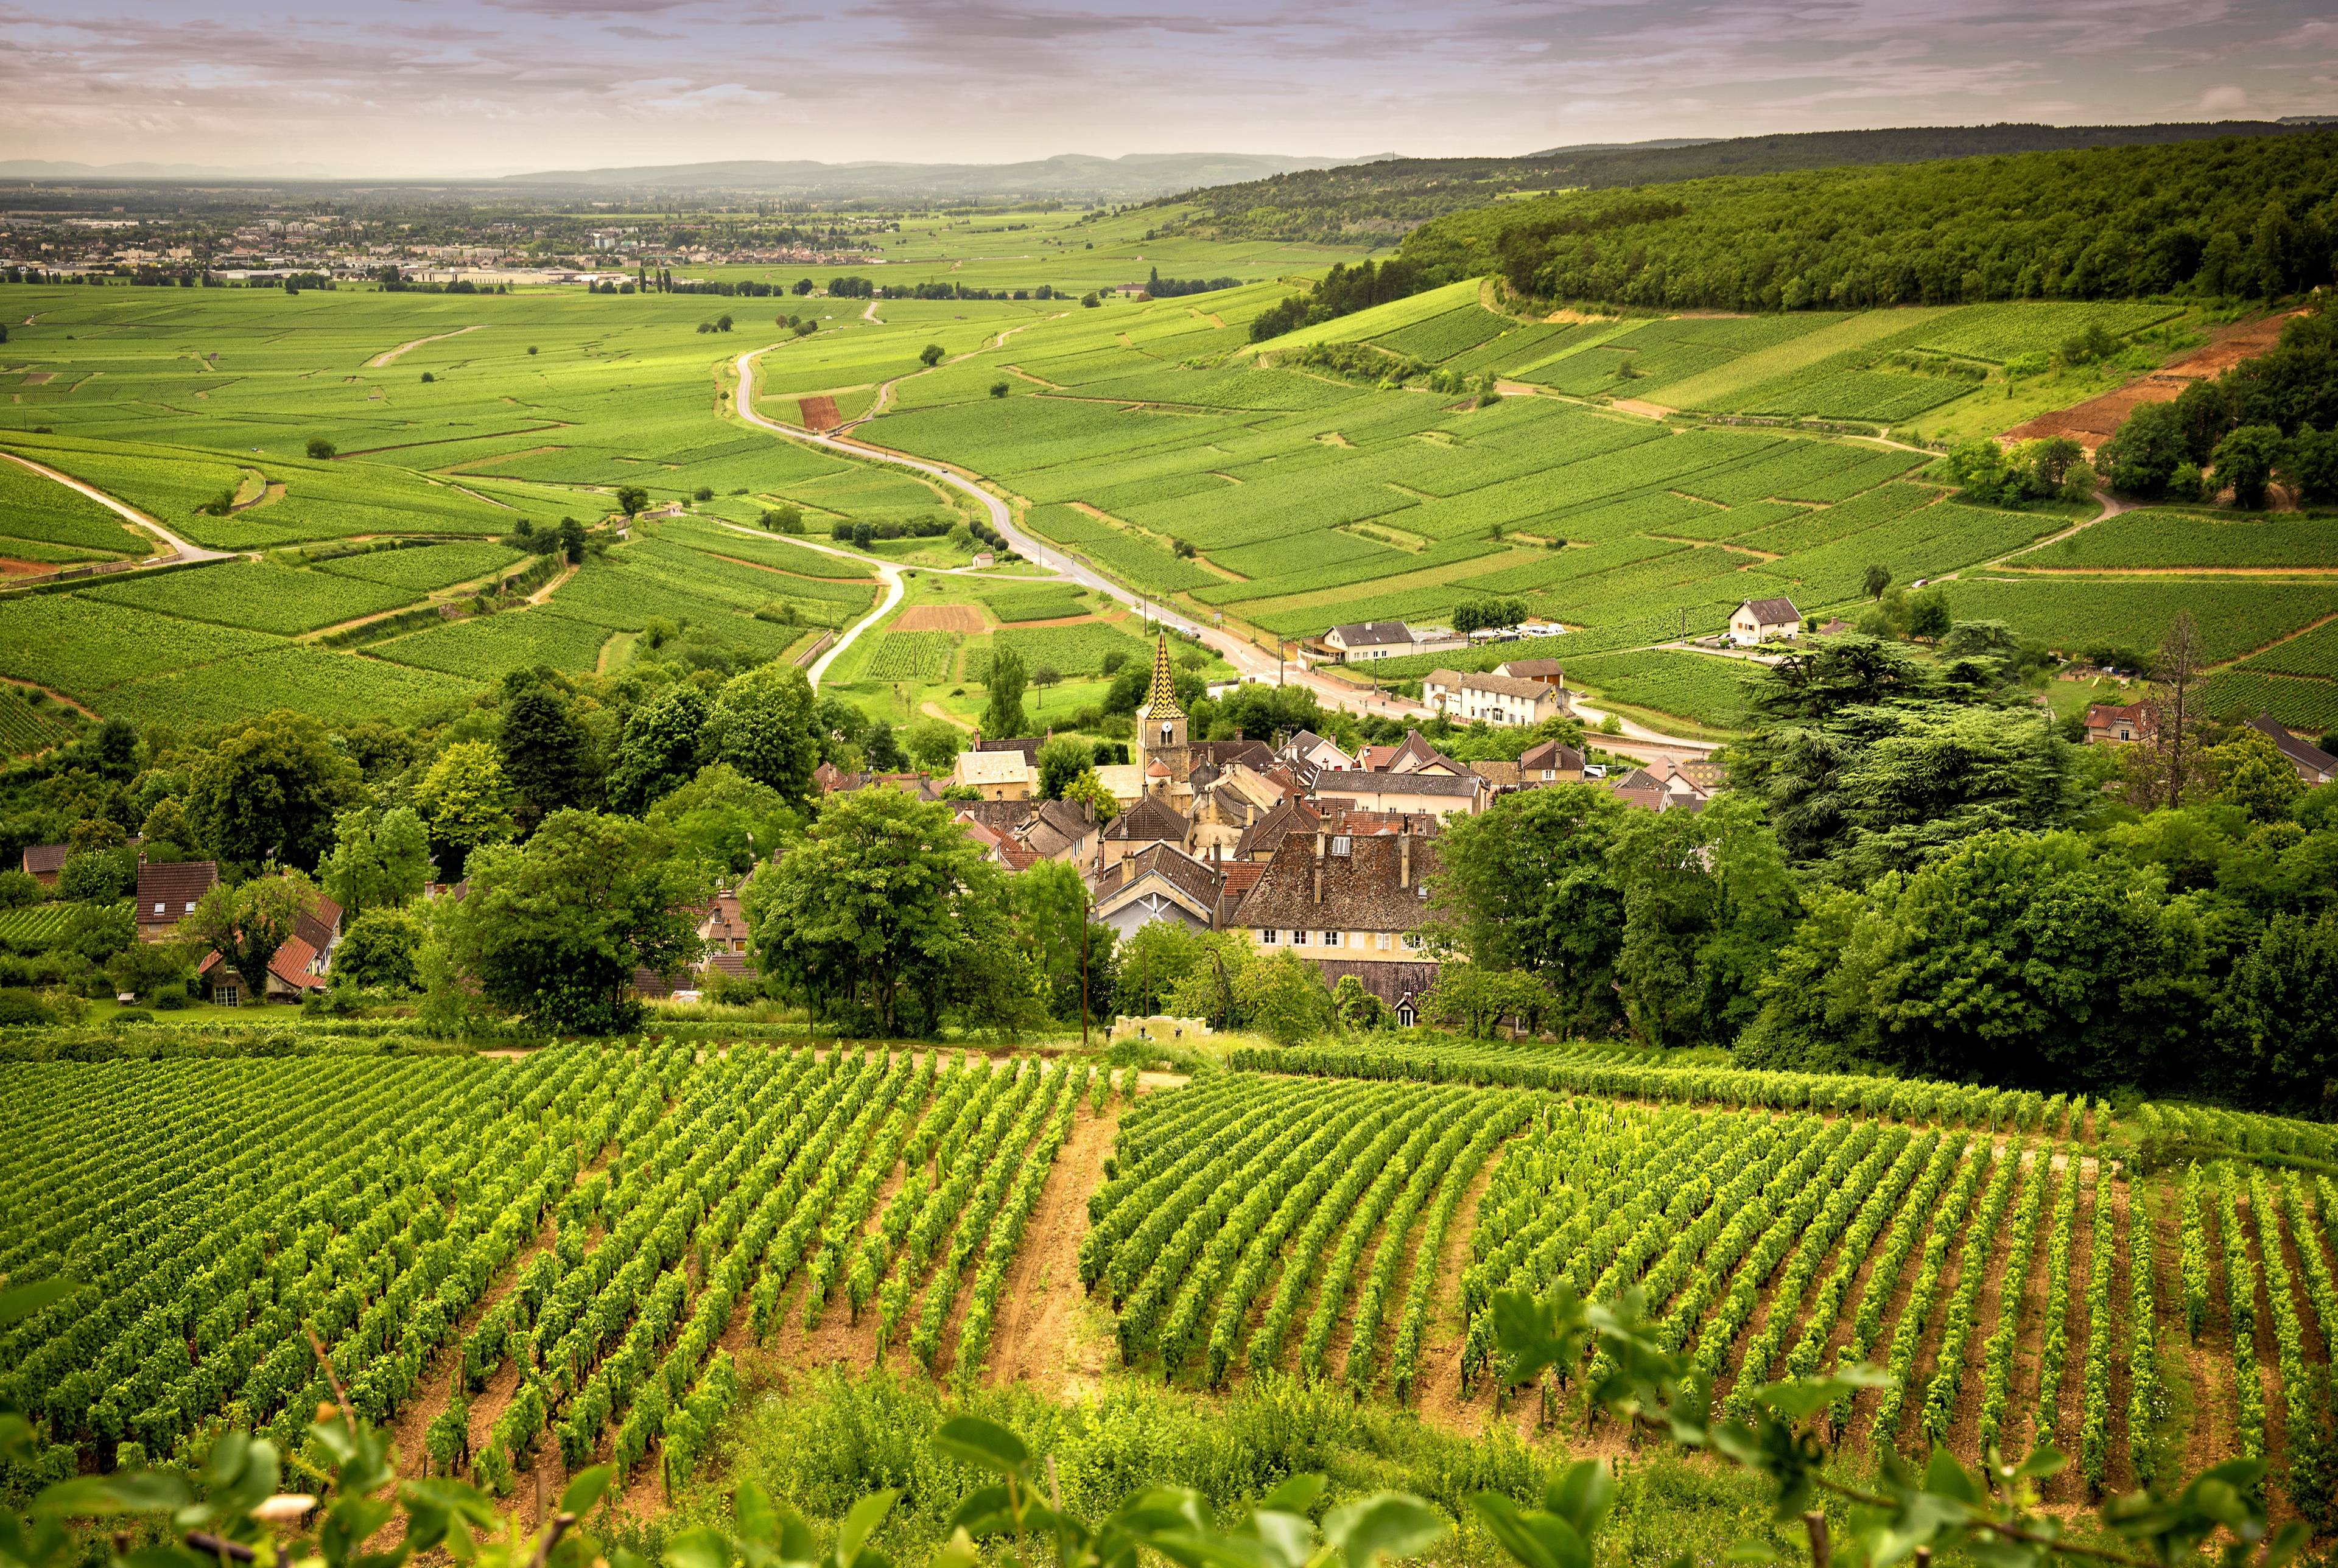 A 2-Day Escape in the Mountains, the Vineyards and the Emblematic Lyon